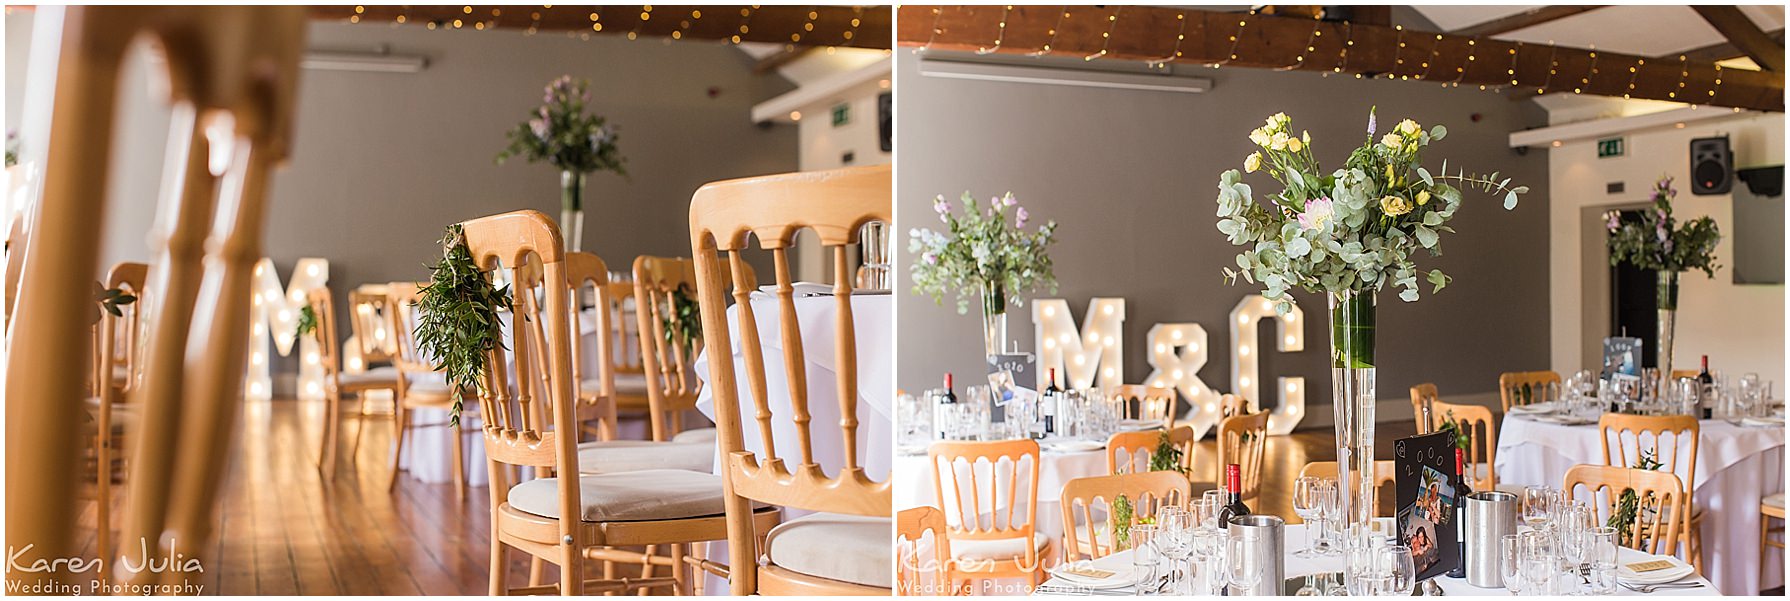 rustic room wedding styling in the Brindley Rooms, Castlefield Rooms